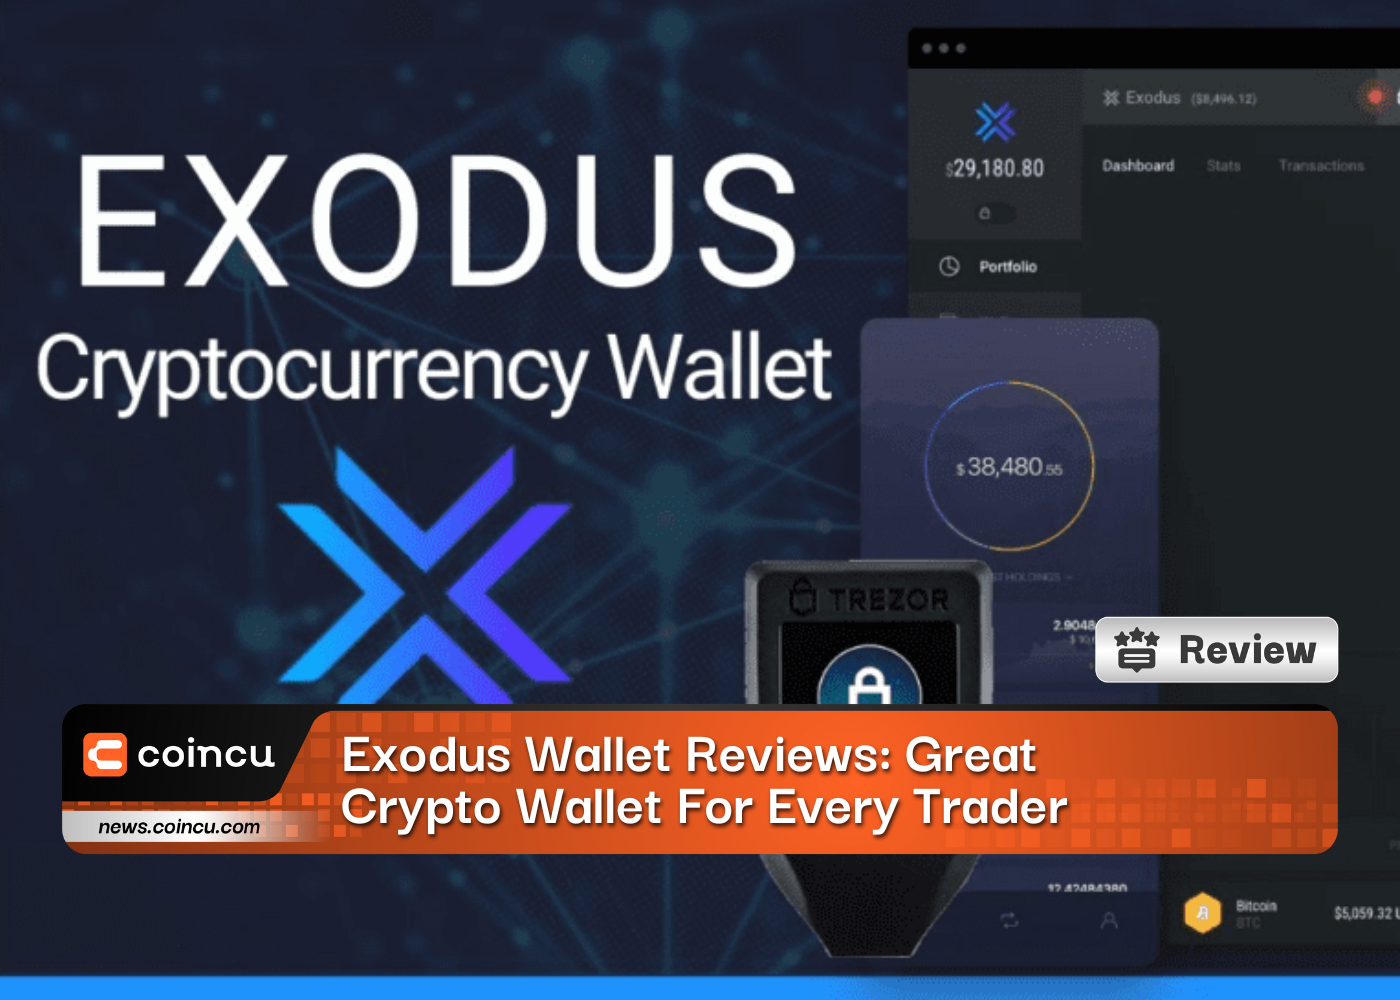 Exodus Wallet Reviews: Great Crypto Wallet For Every Trader